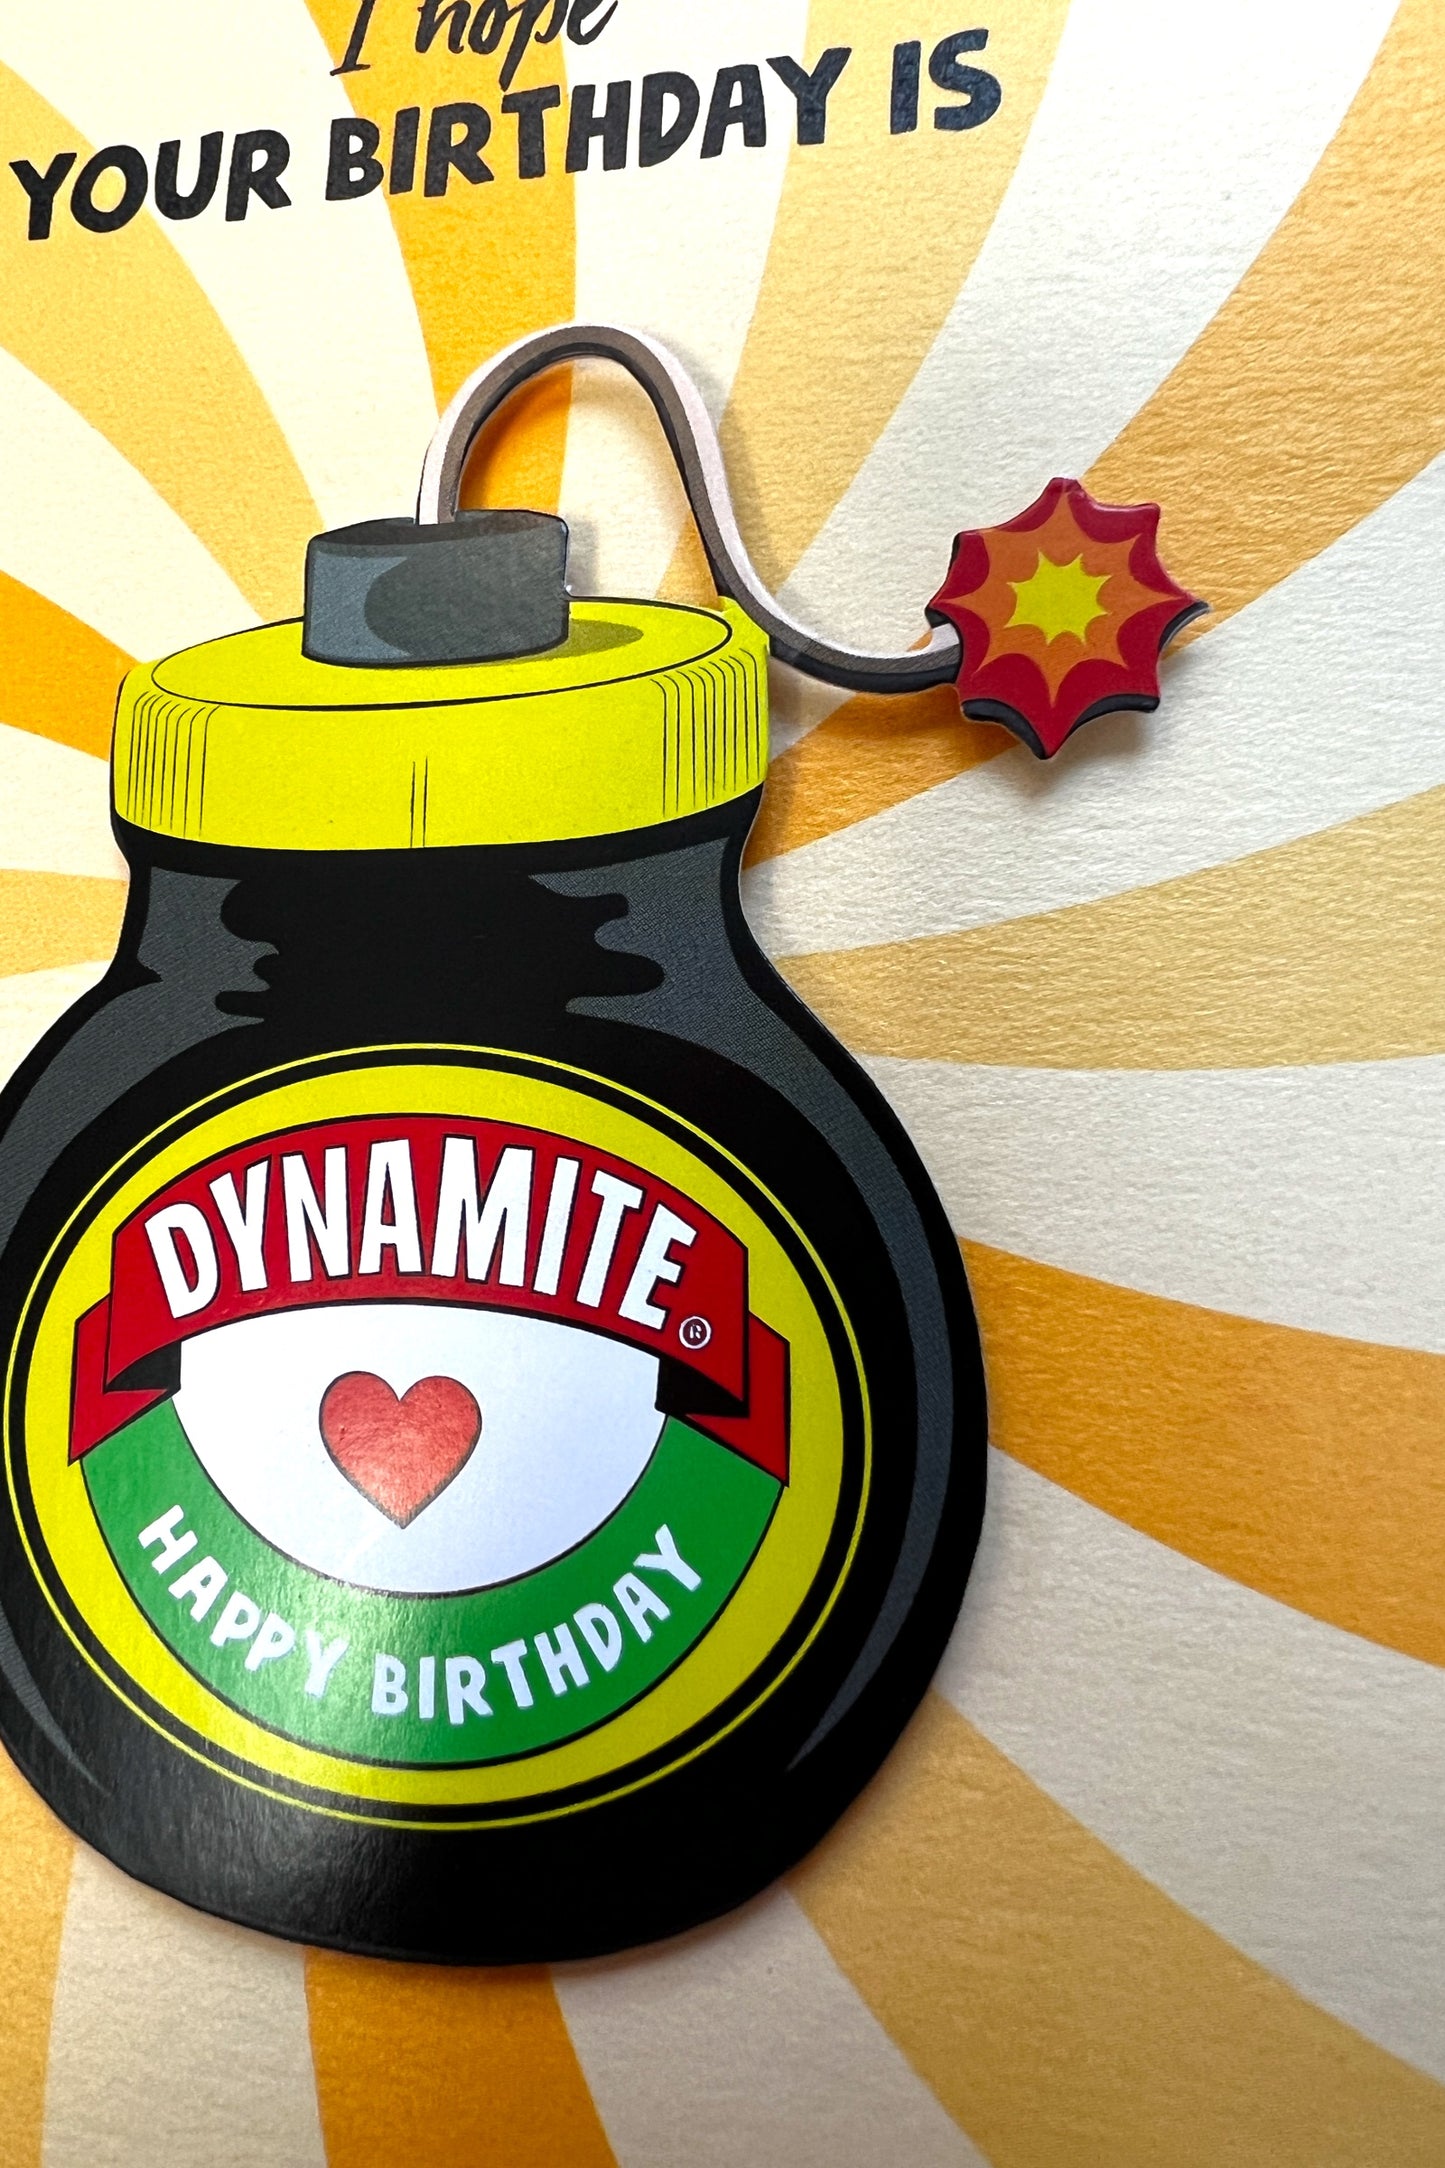 I Hope Your Birthday is Dynamite Card